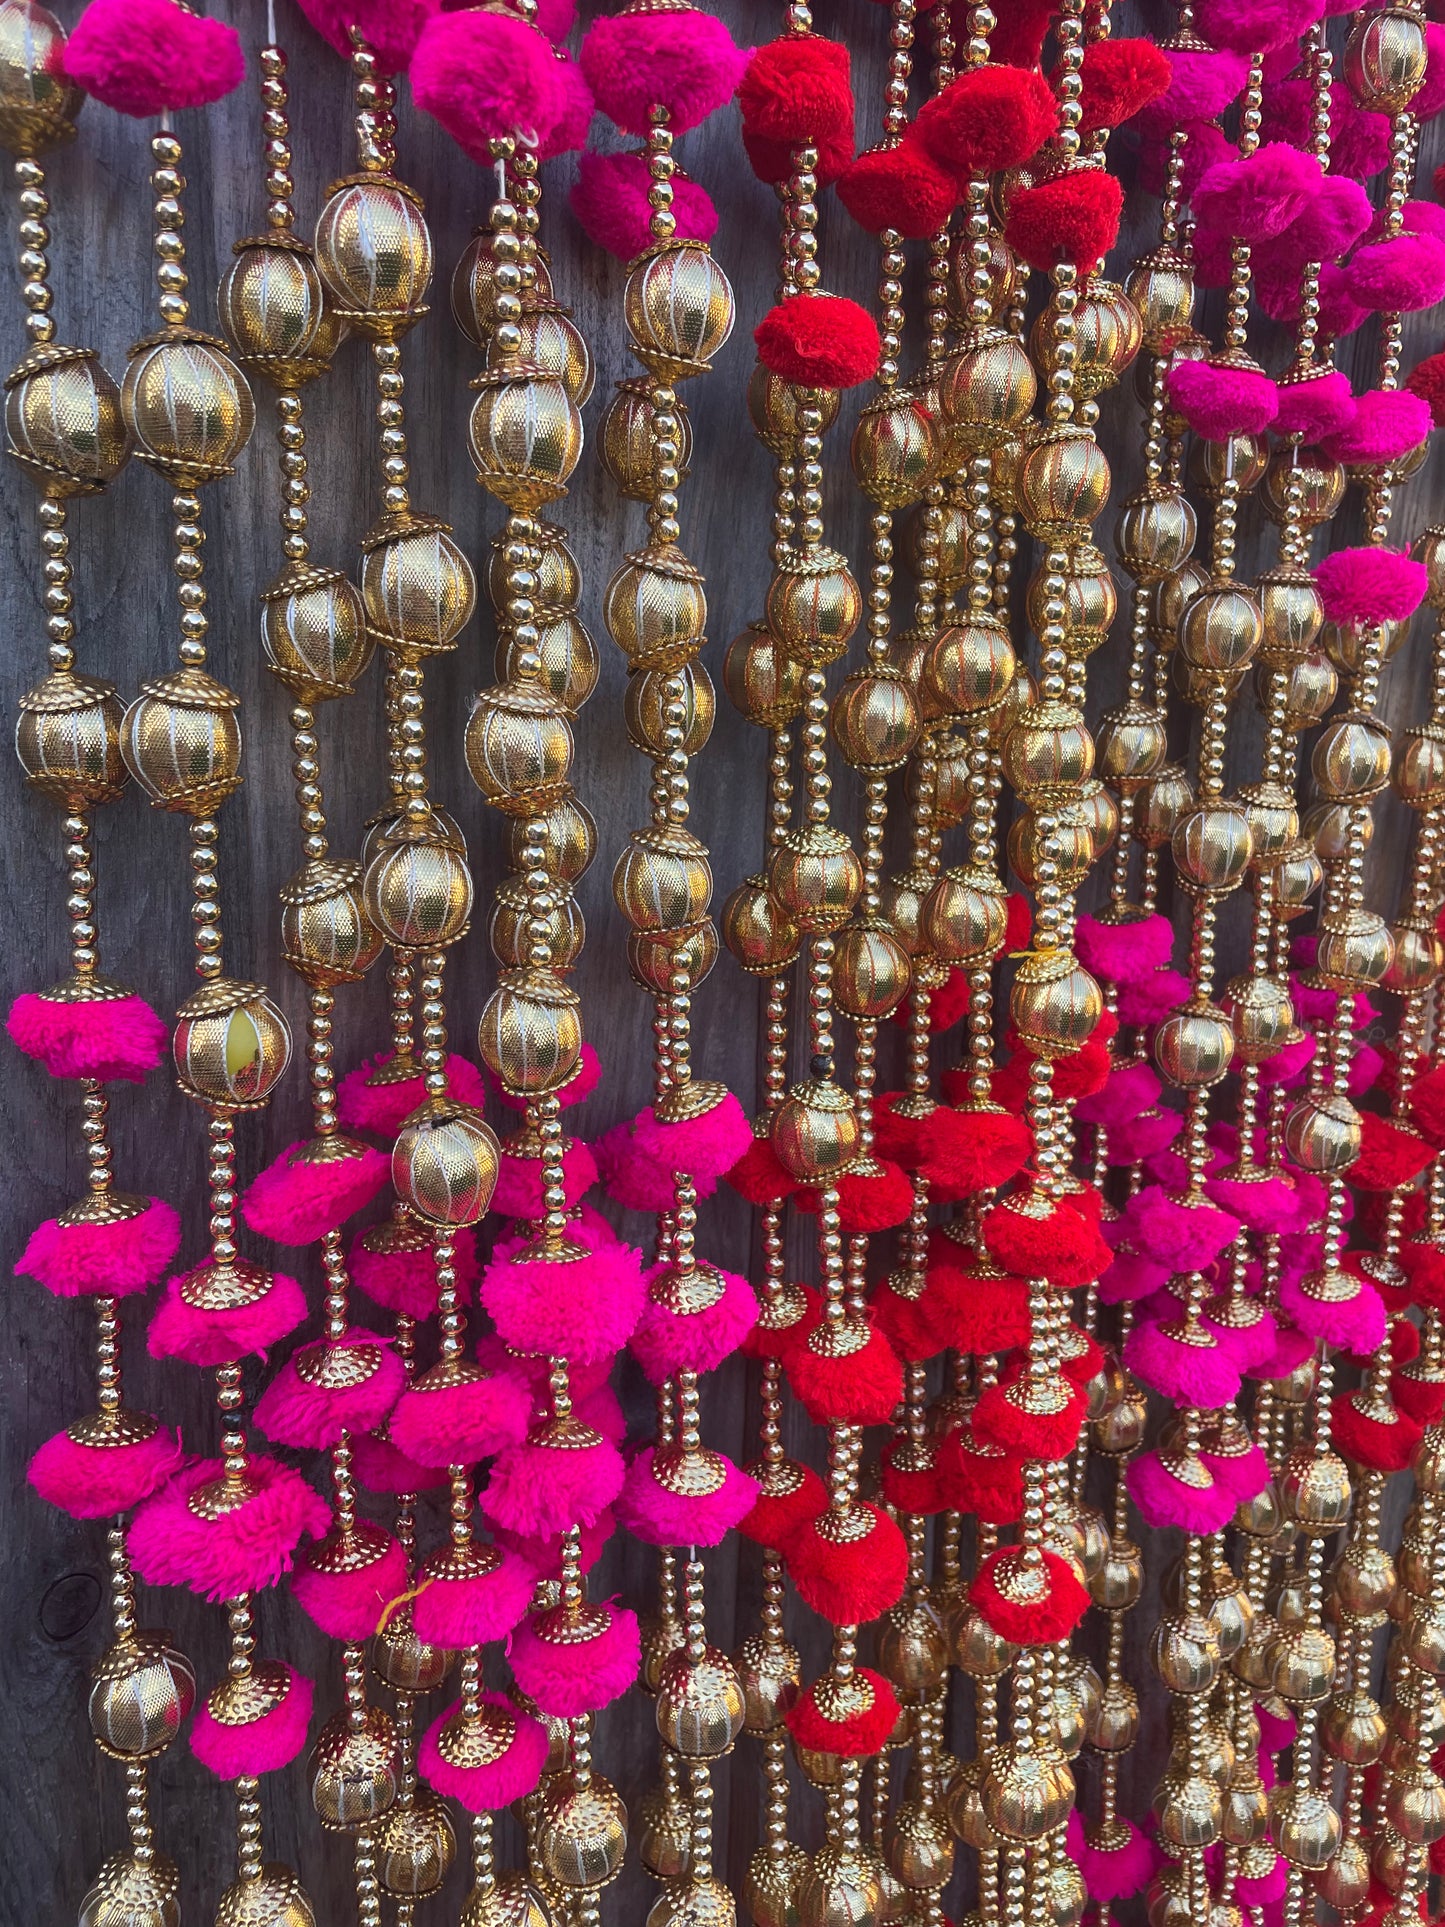 Pack of 10 Red/Rani Pom Pom Hanging Strings for Diwali Mehndi Garden Party Decoration Outdoor Backdrops Event Weddings Home Decor New Home